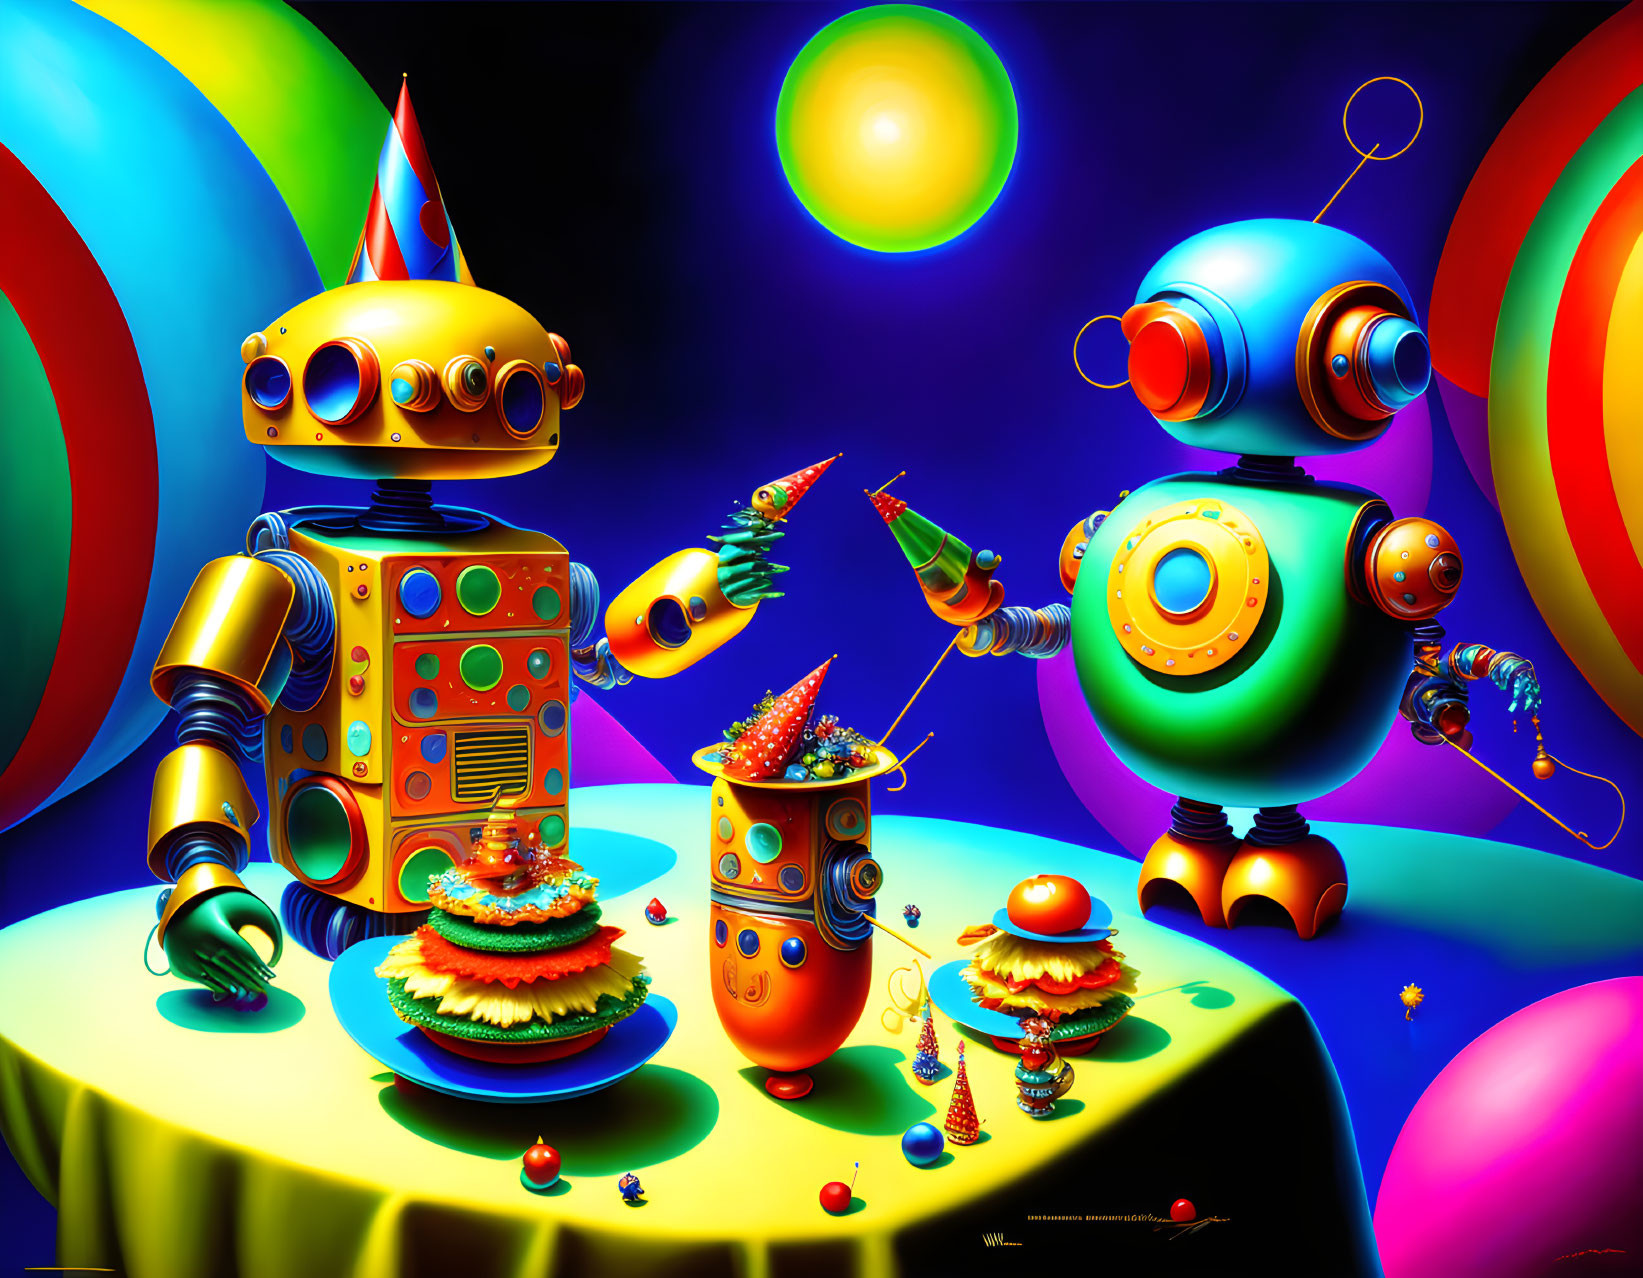 Robots have a party with dancing and food, by Mich